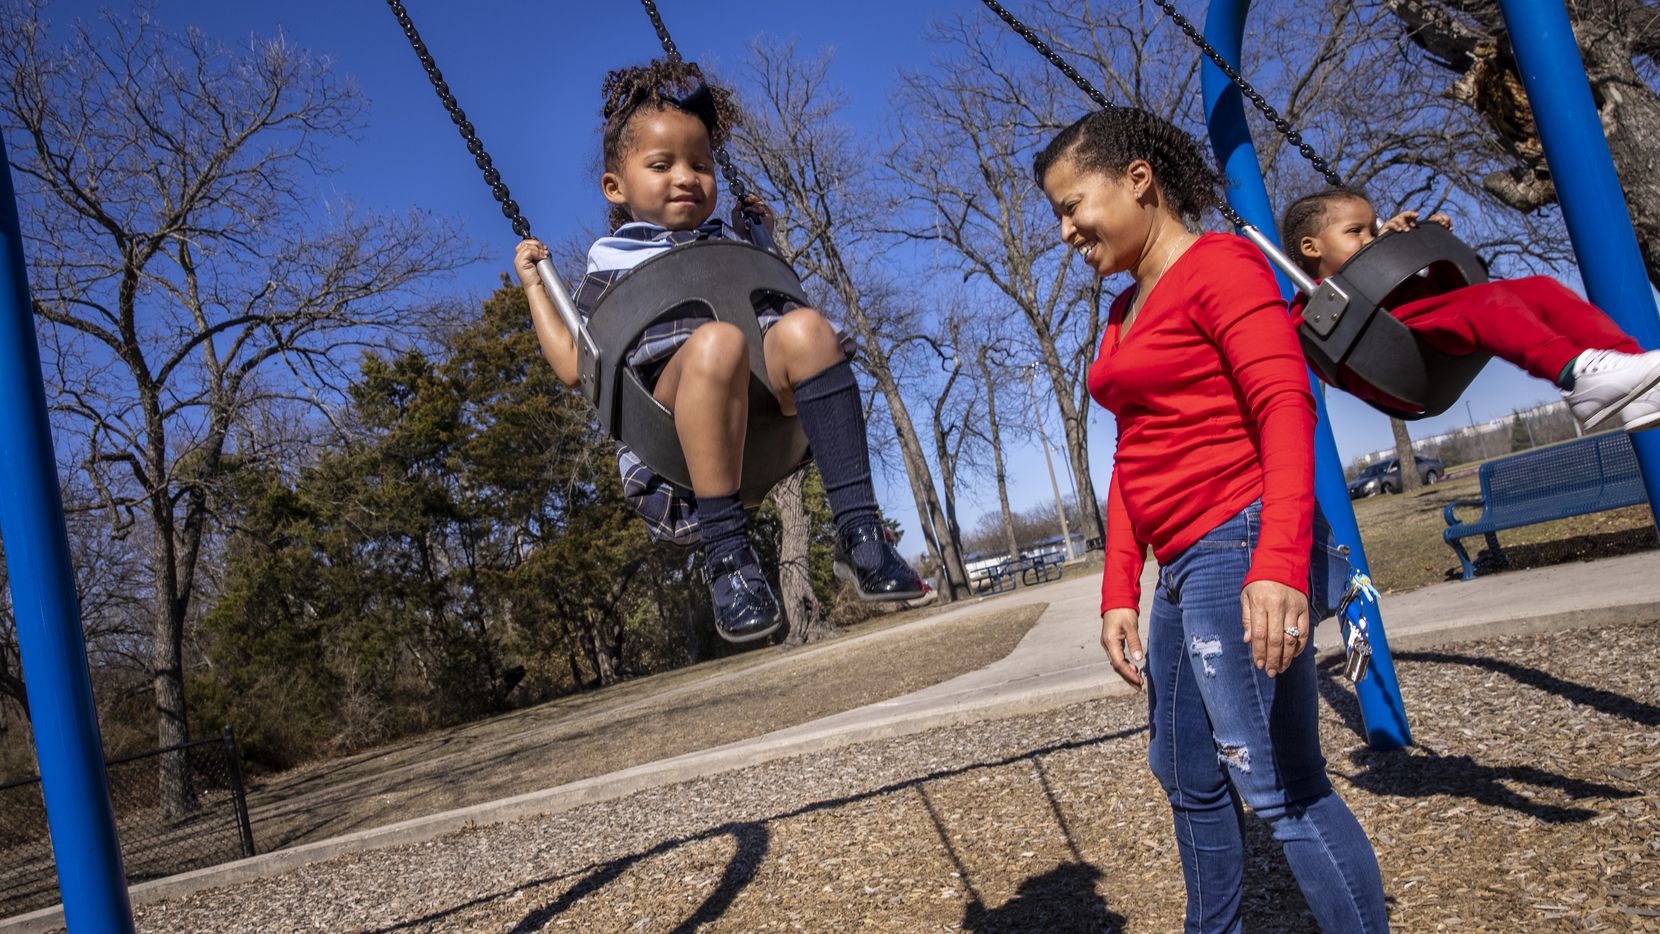 Marchelle Simpson (center) pushes her children, Kyla, 4 (left) and Kyre, 2, on the swings at...